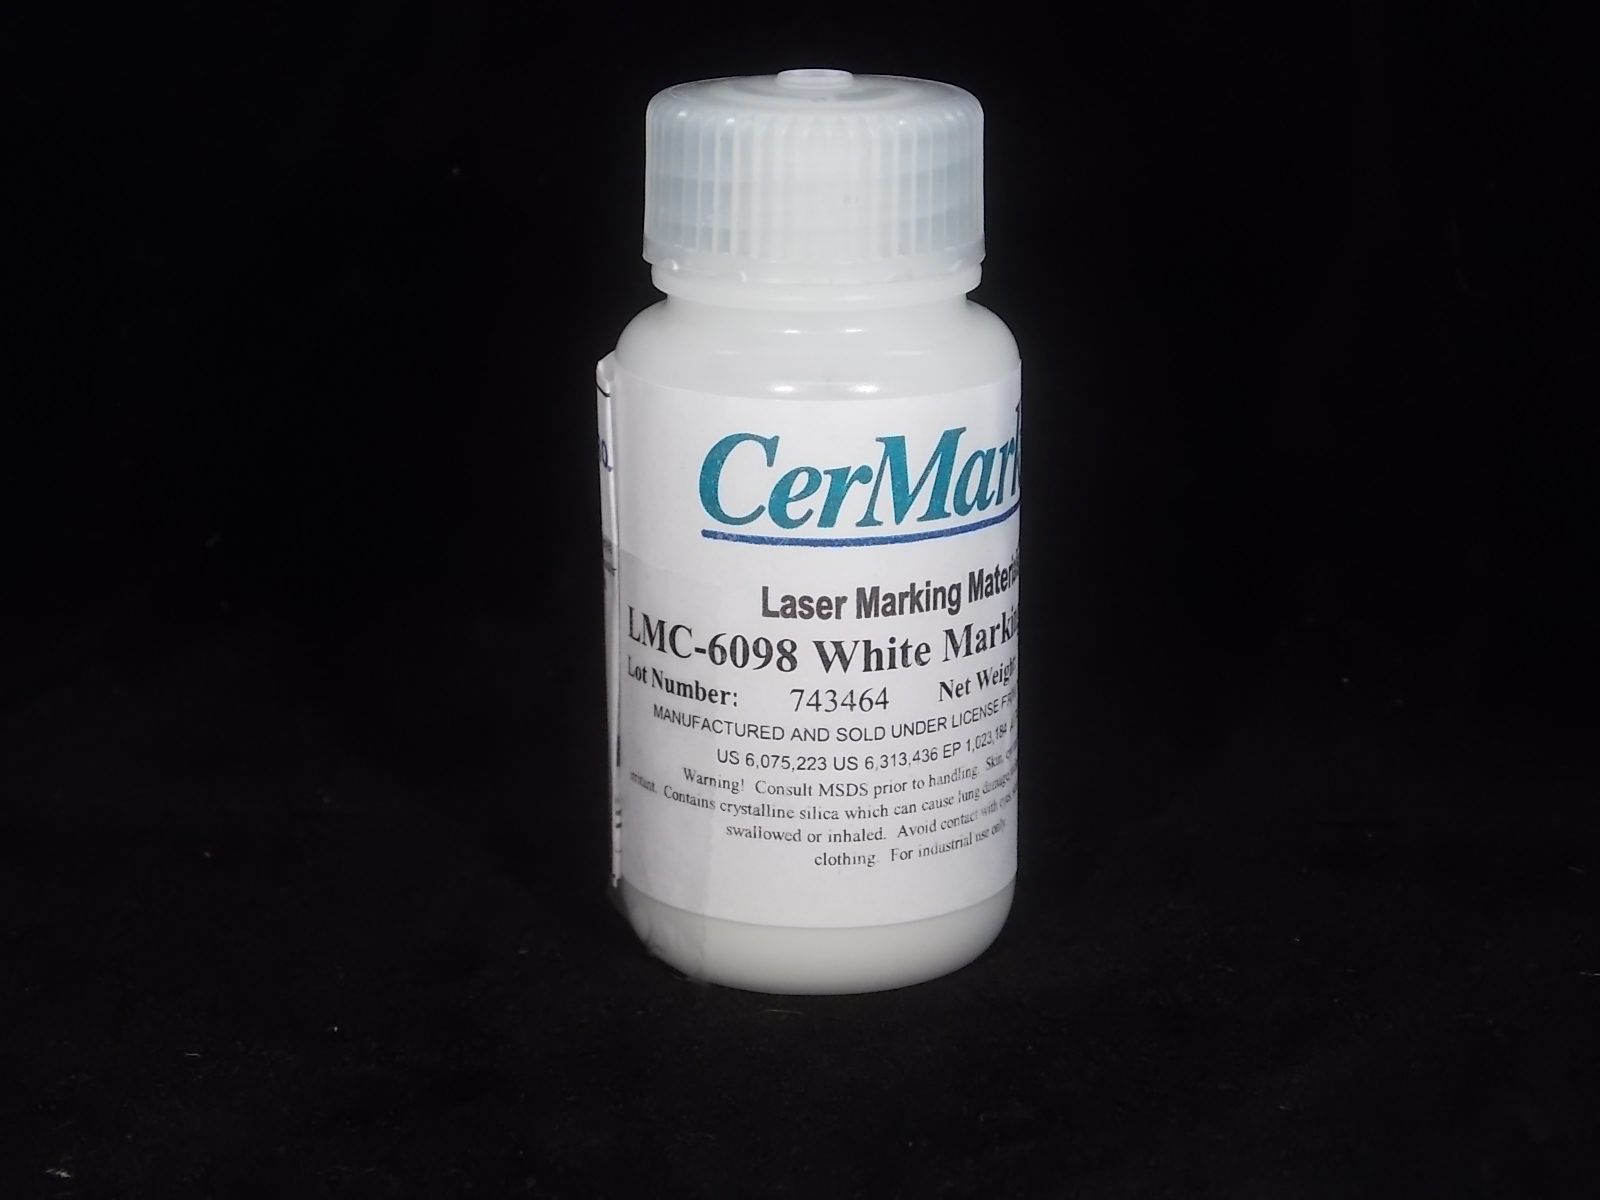 How to Use Cermark LMM 6000 